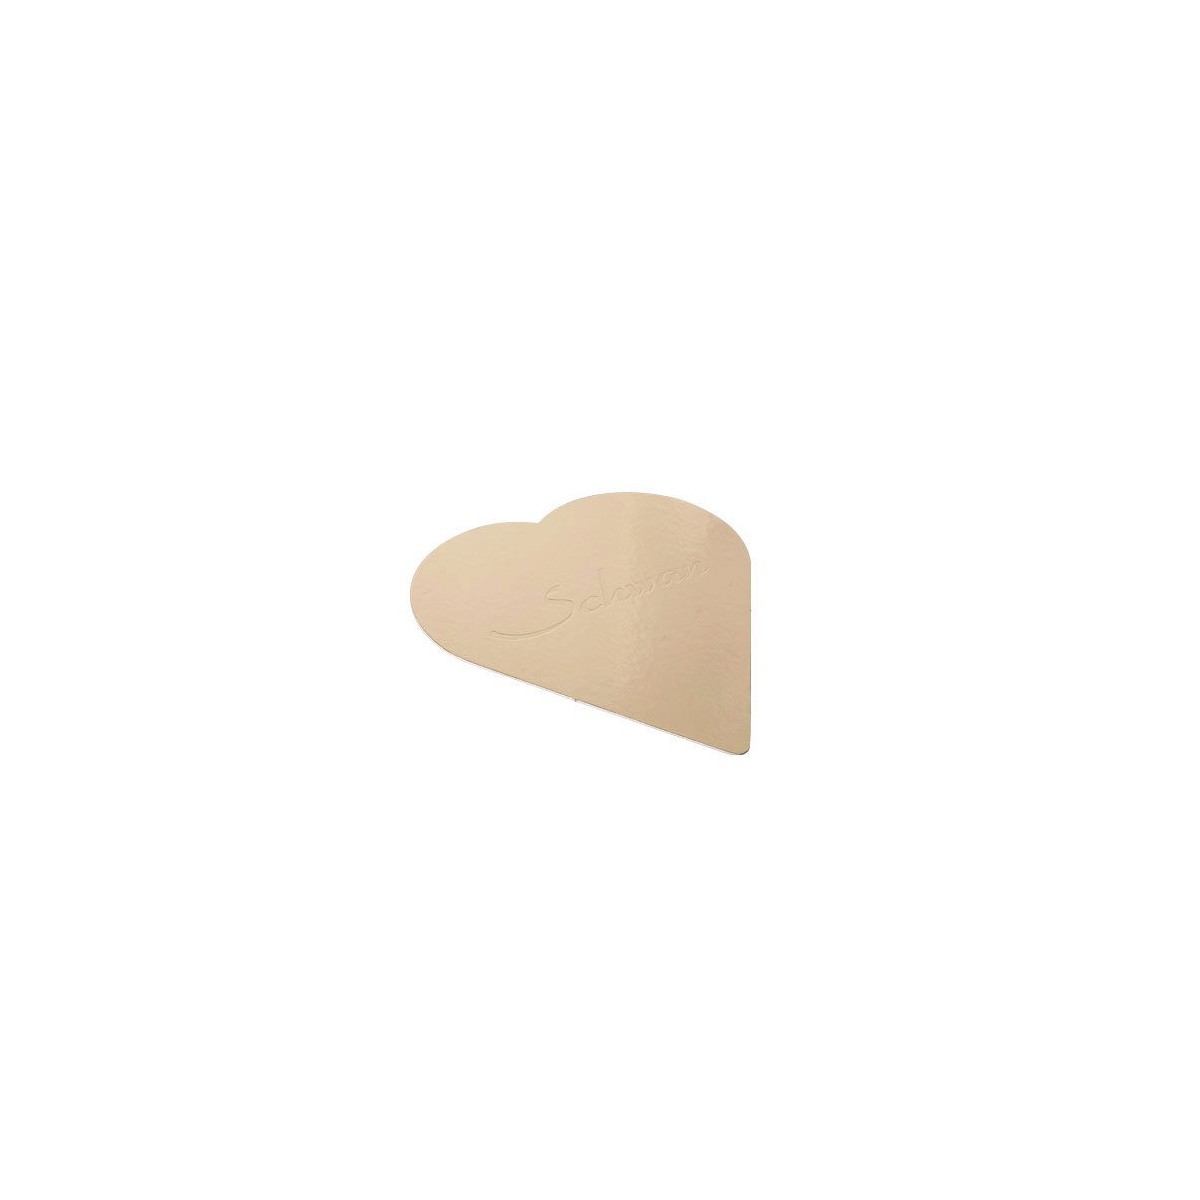 CAKE BOARD HEART GOLD 19,5CM 25 PIECES FOSTPLUS  INCLUDED  PACKAGE ON/ORDER